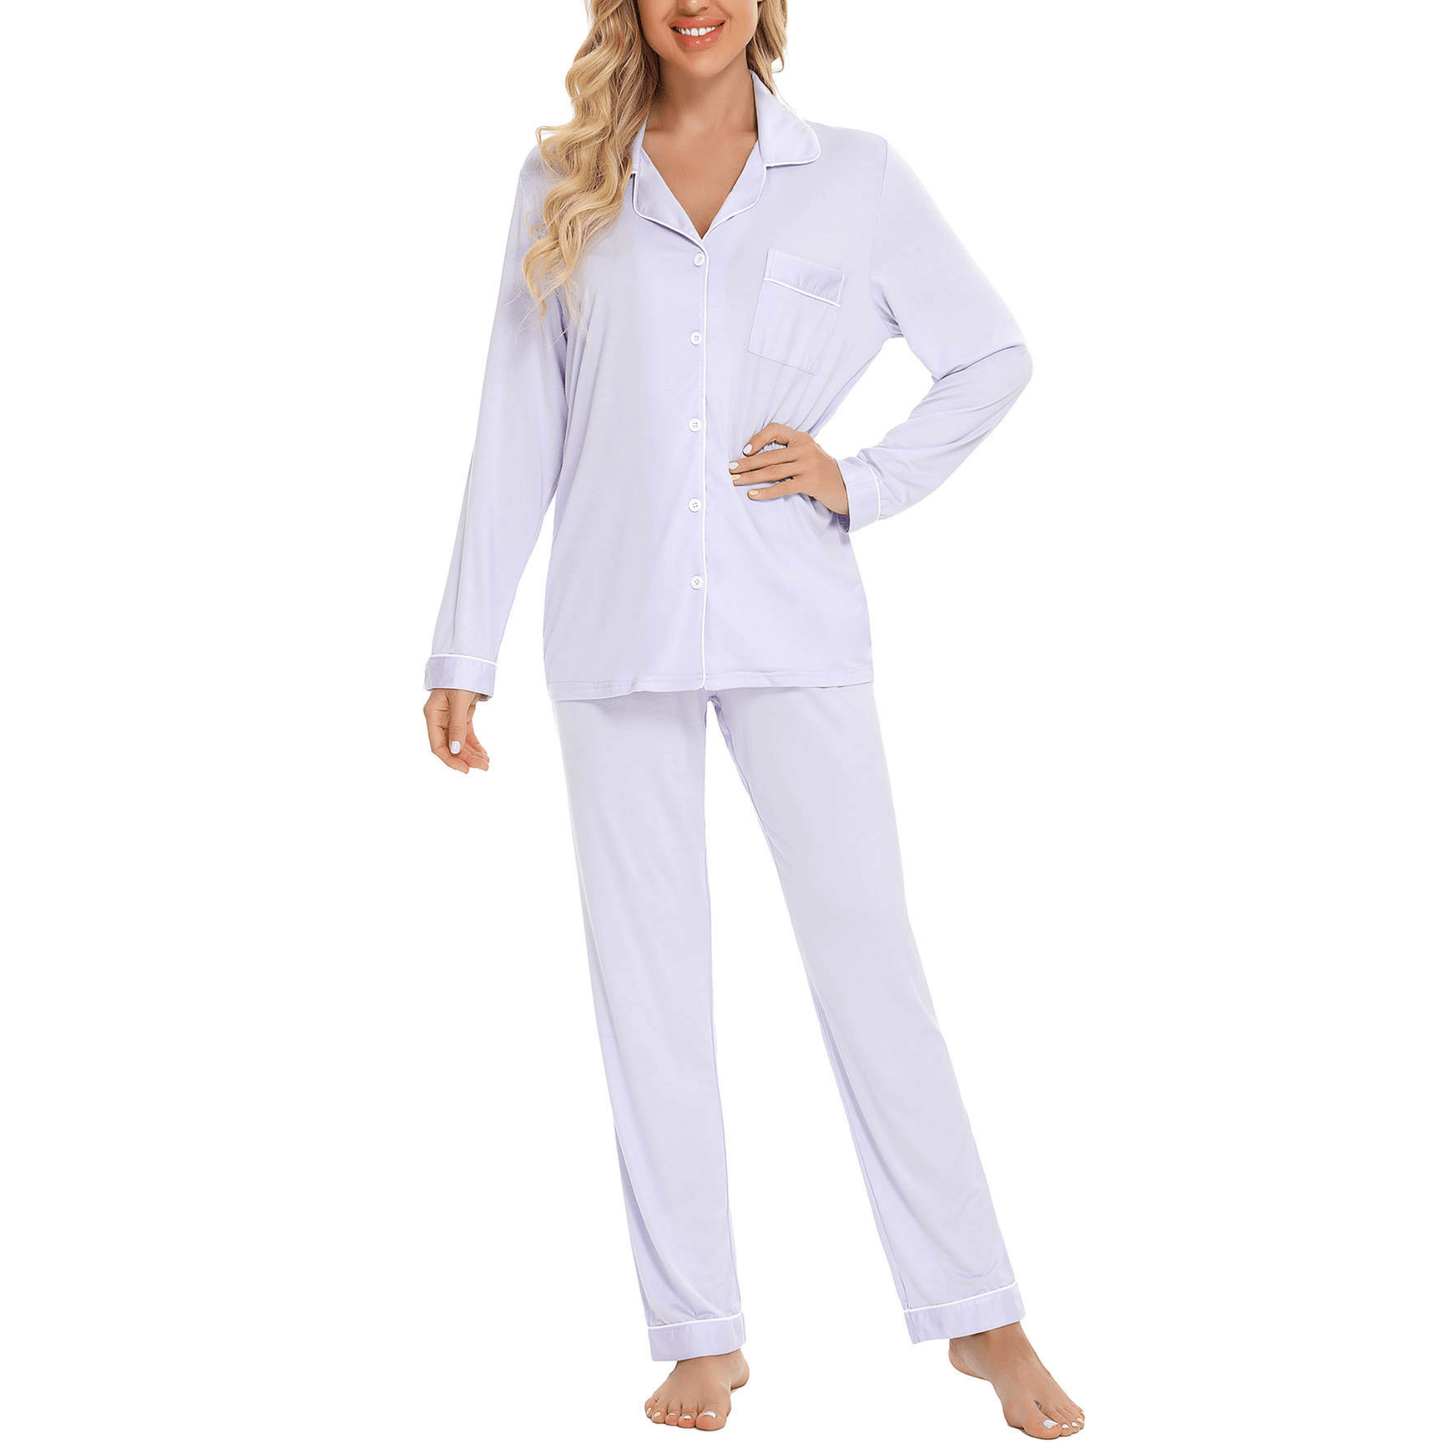 Naturally breathable bamboo sleepwear sets, perfect for hot sleepers